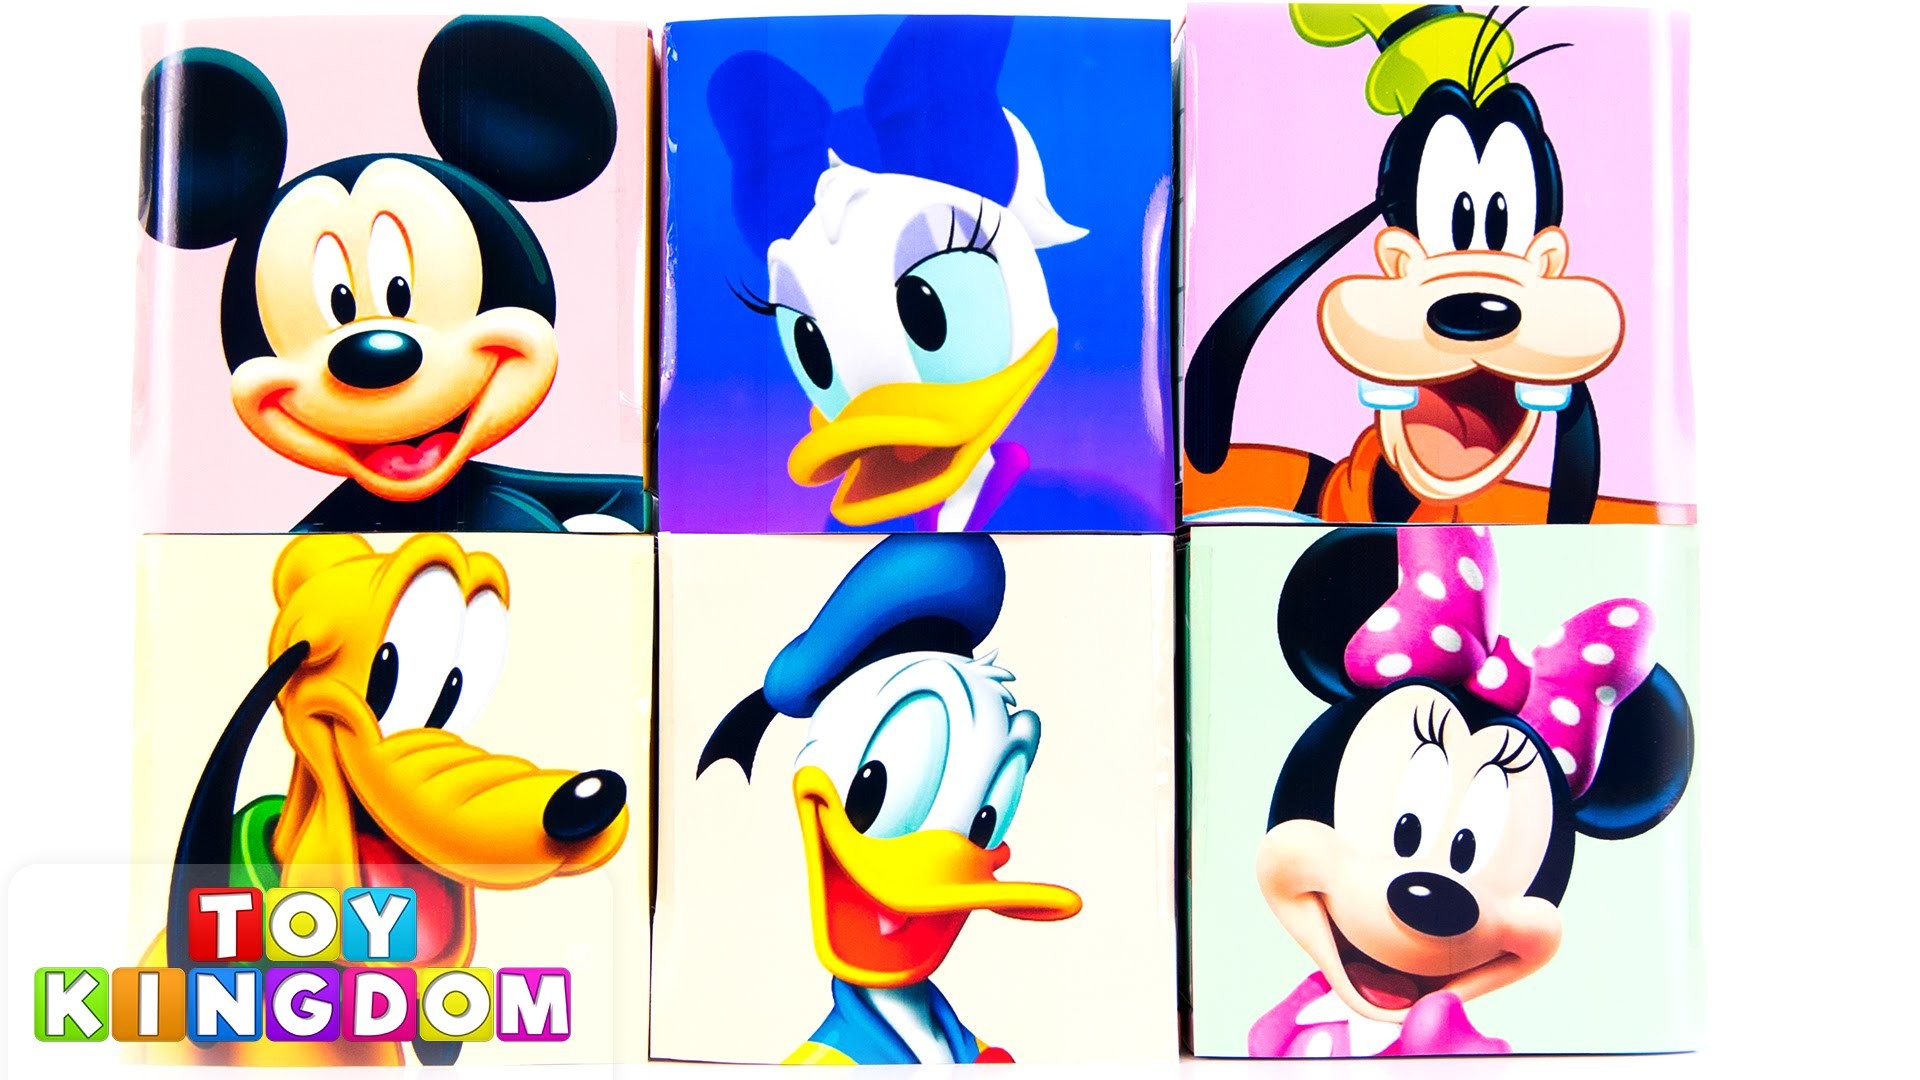 1920x1080 Mickey Mouse Clubhouse Disney Cubeez Toy Surprises Cubes Minnie Goofy  Donald Daisy Pluto DIY - YouTube